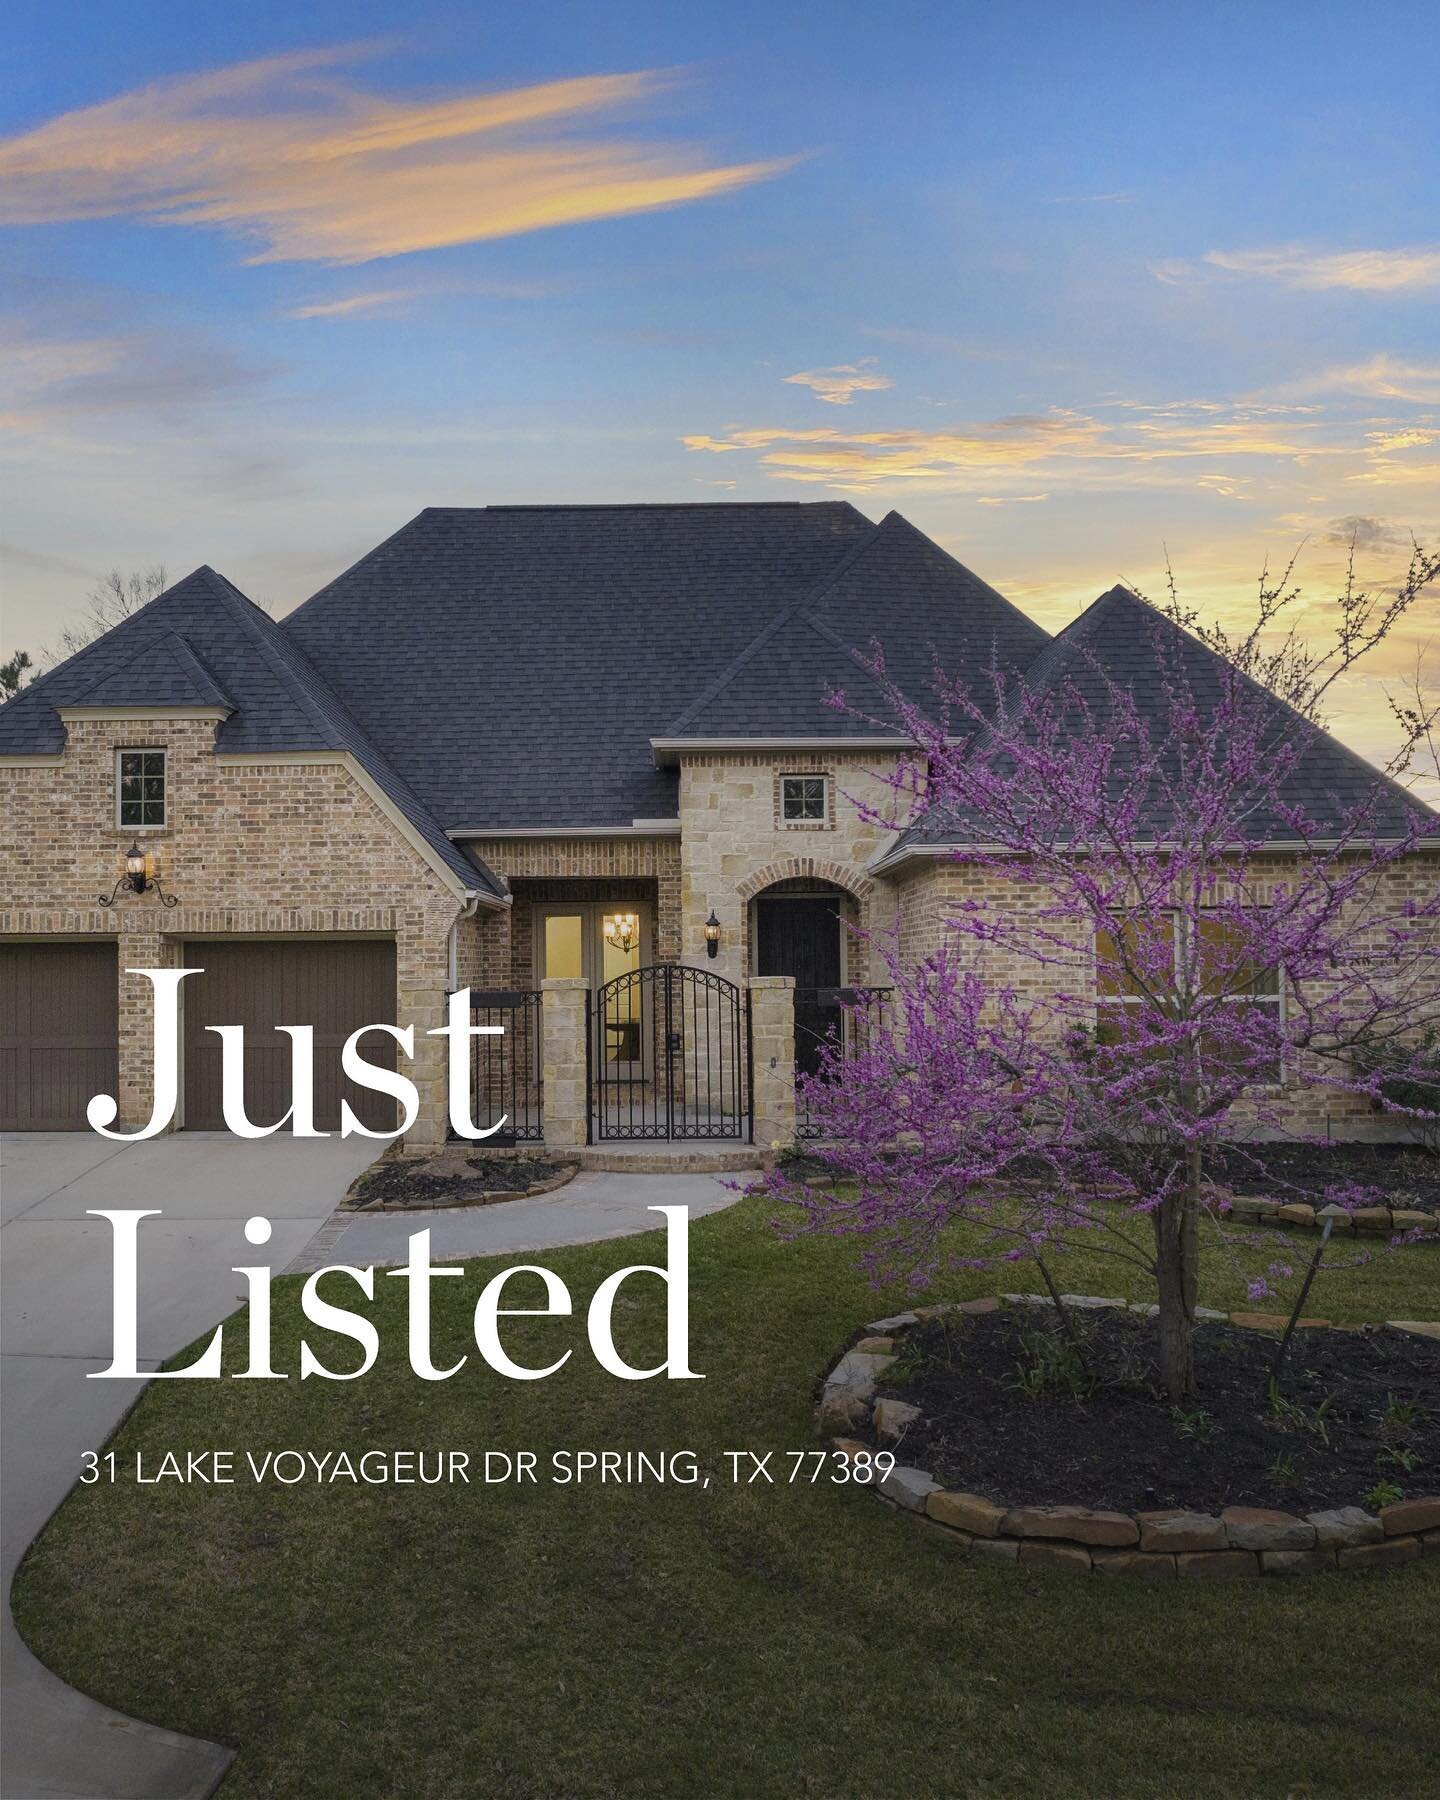 ✨Just Listed✨this Darling home in Creekside Park! 

🛏 4 Bedrooms
🛁 3 Full + 1 Half Baths
🌳3,874sqft
✏️Zoned to Creekside Forest Elementary School

With a large corner lot with room for a pool, lovely courtyard entry and an extensive side patio. 

